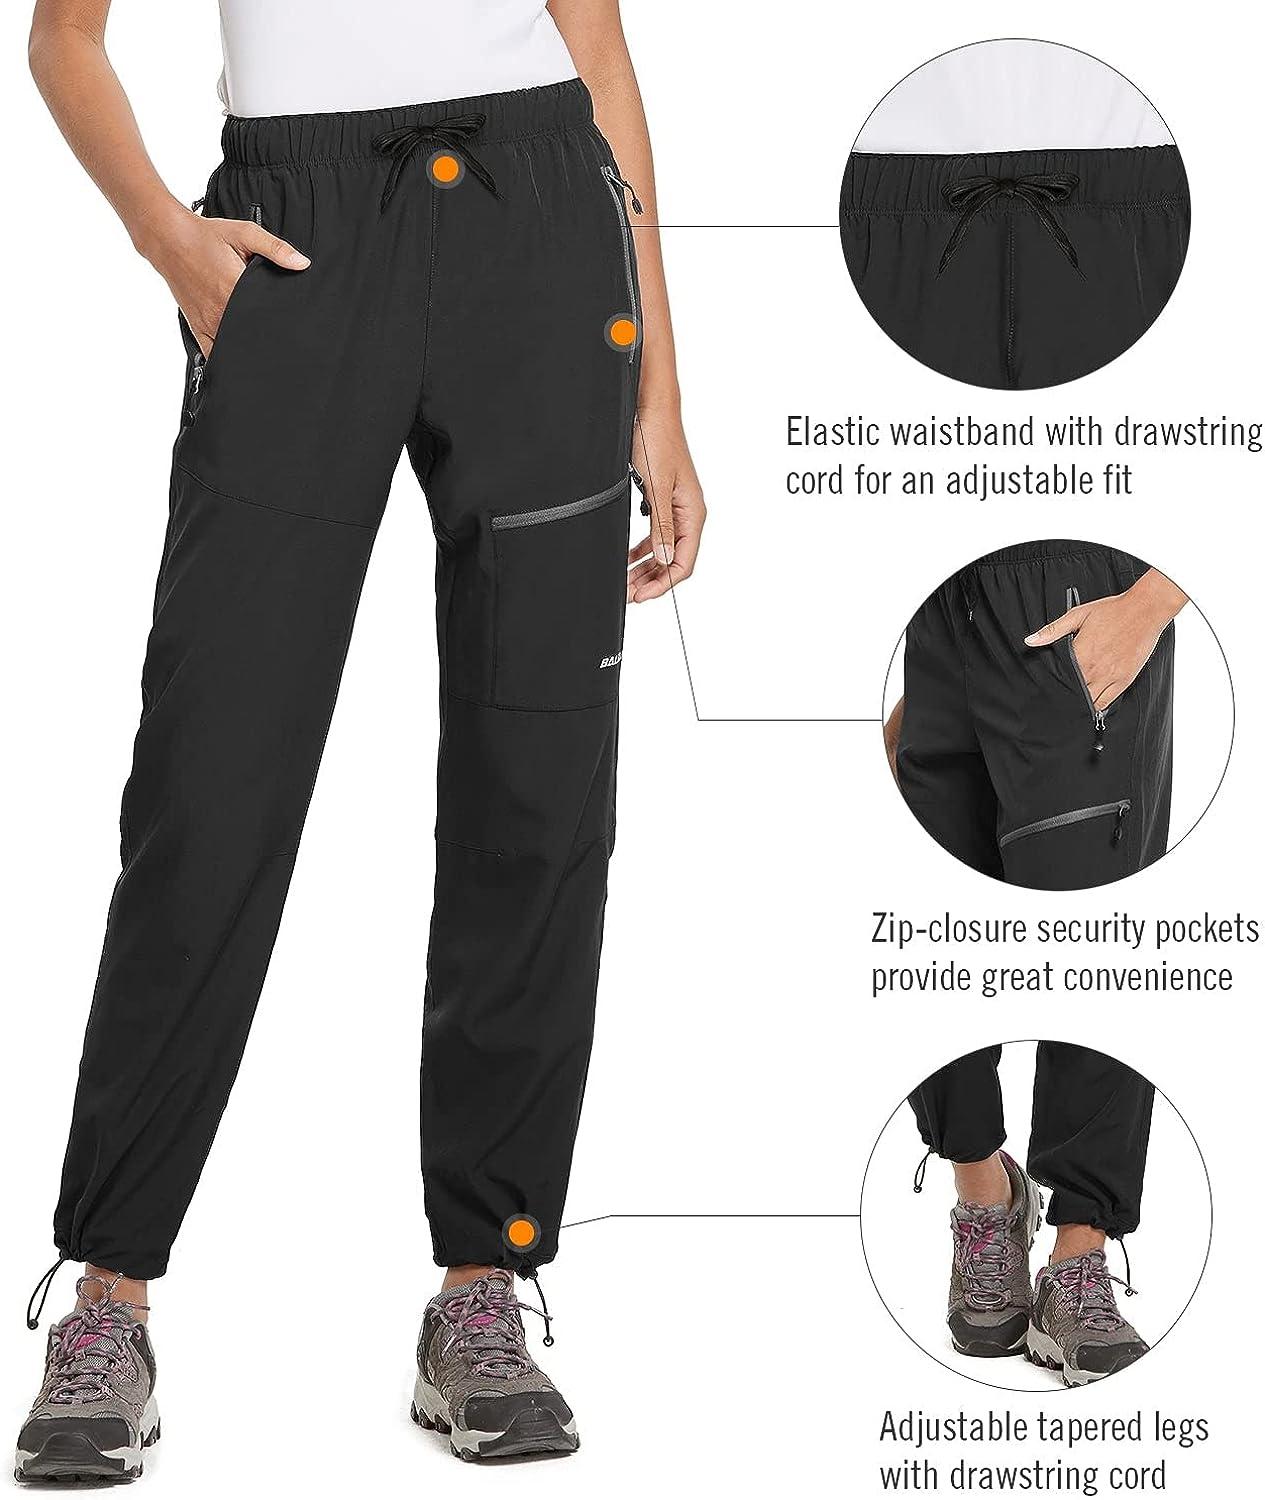 BALEAF Women's Hiking Pants Lightweight Quick Dry Water Resistant